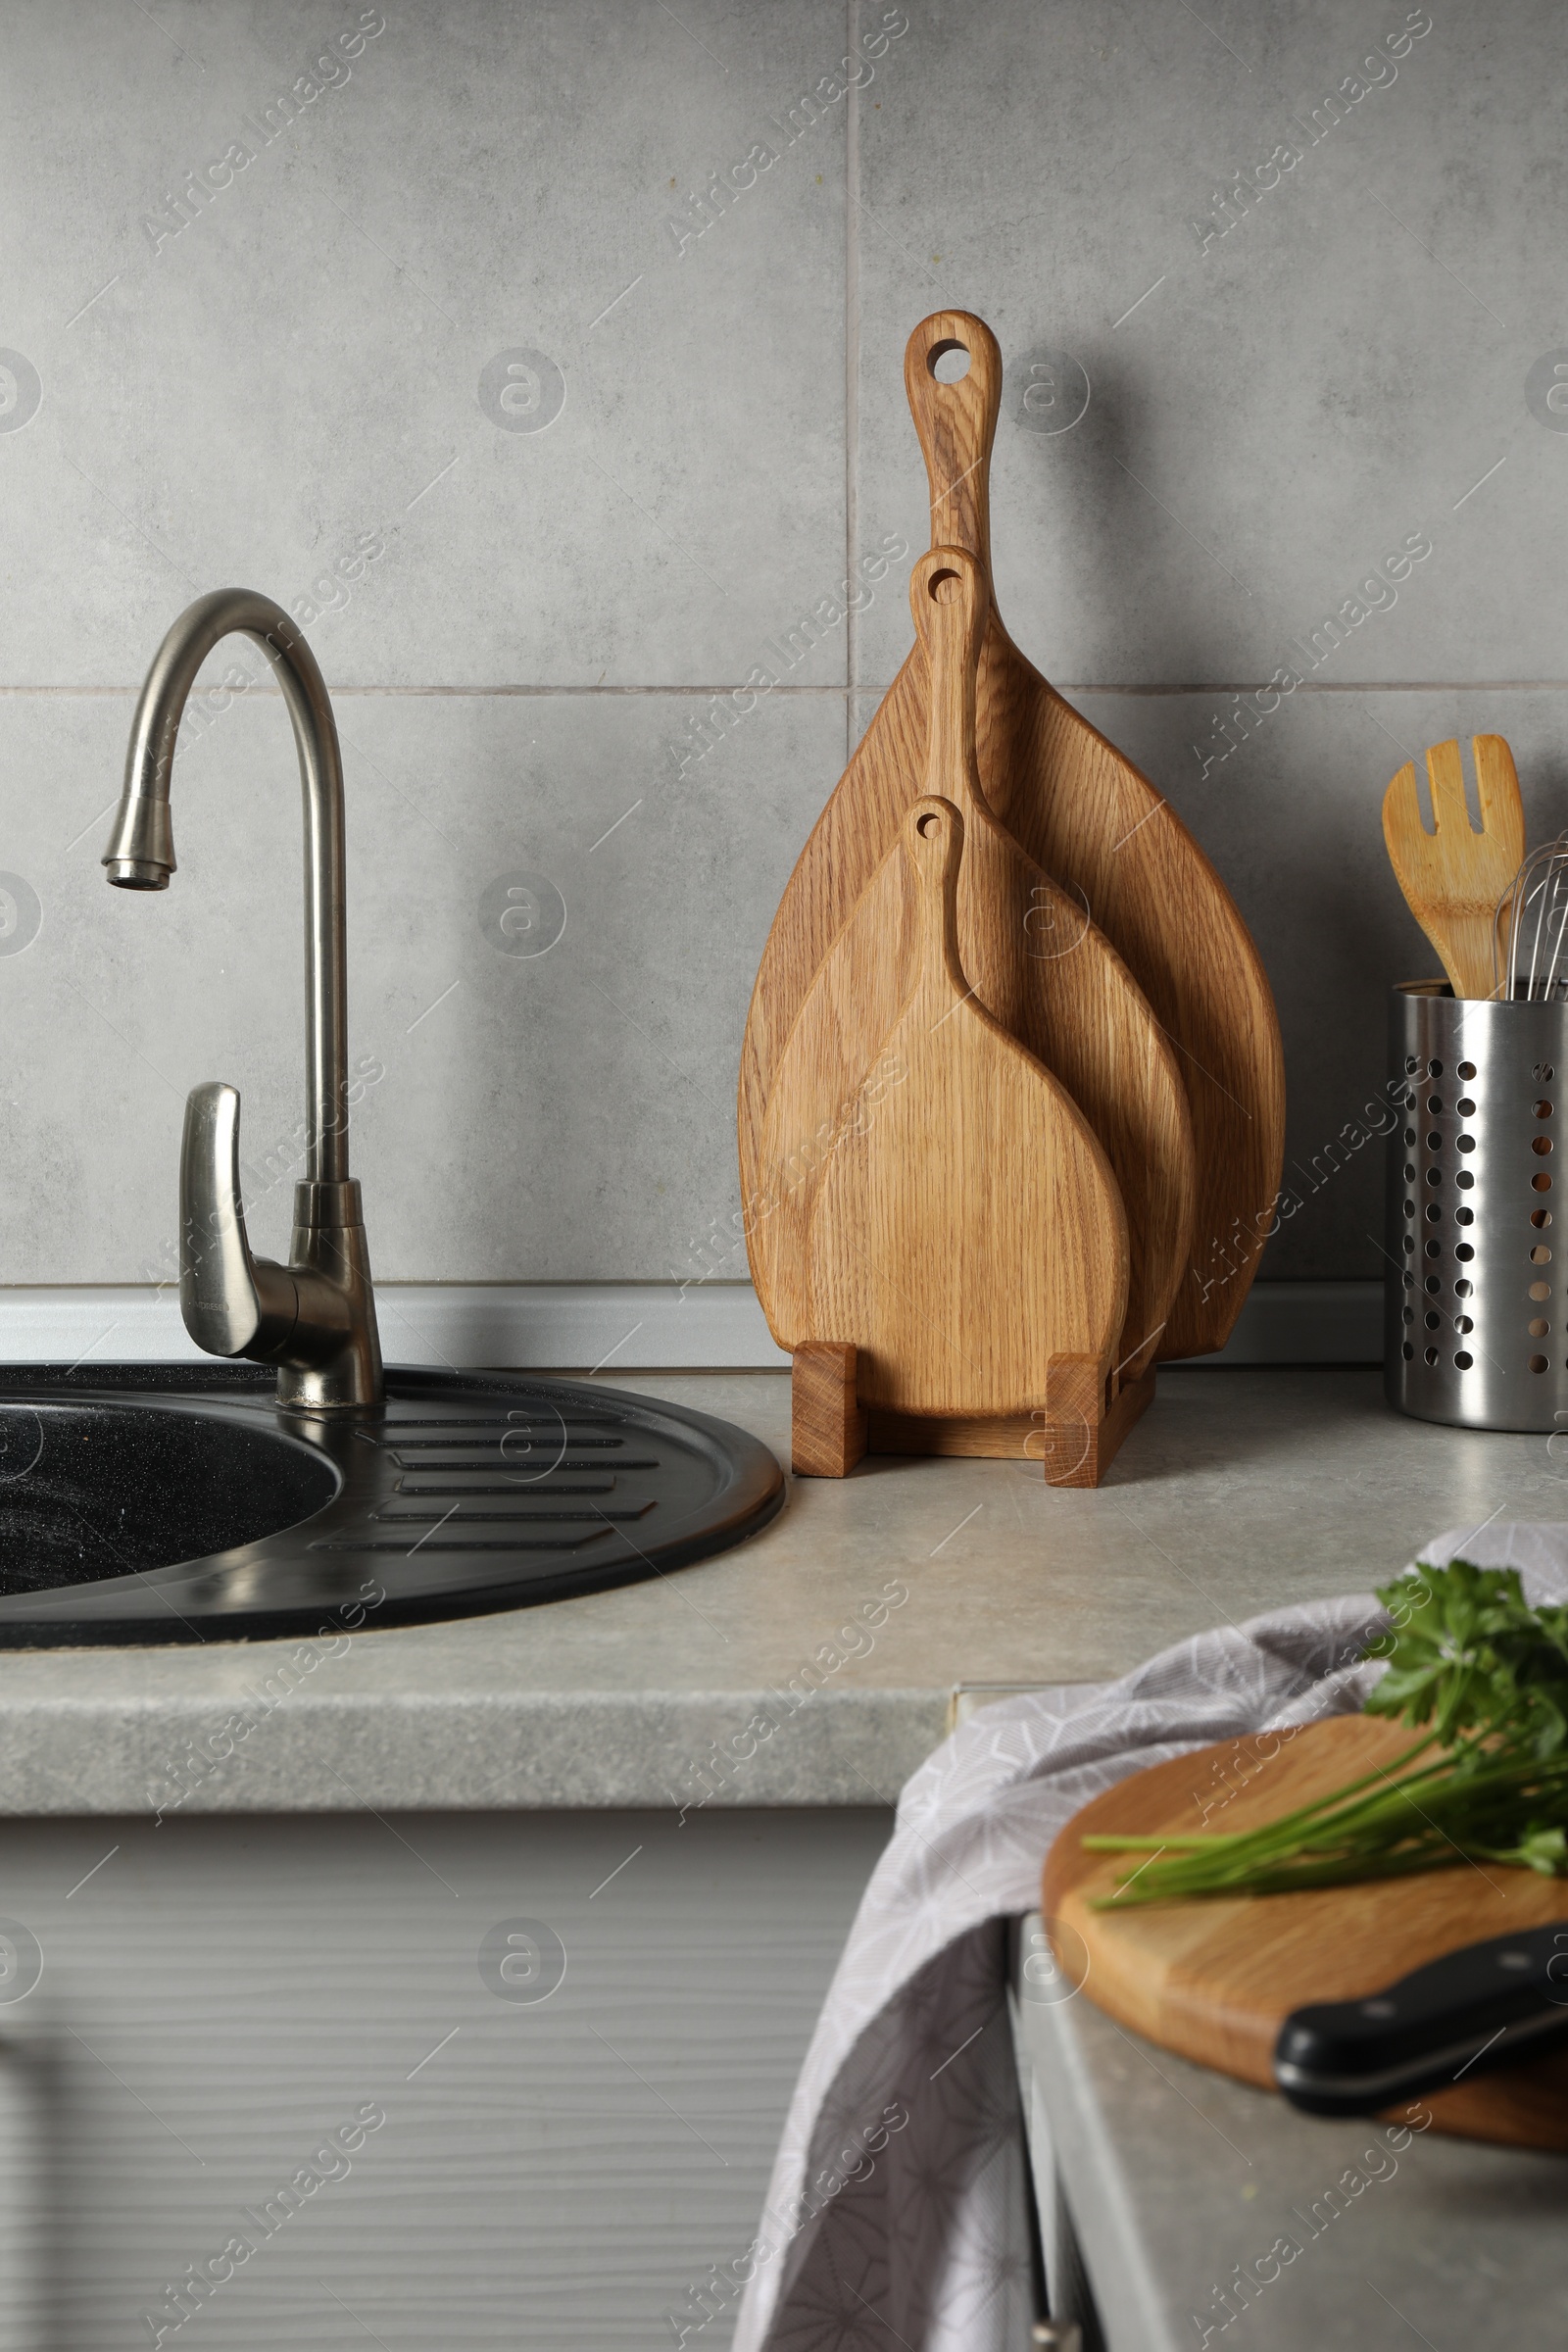 Photo of Wooden cutting boards and other cooking utensils on light grey countertop in kitchen